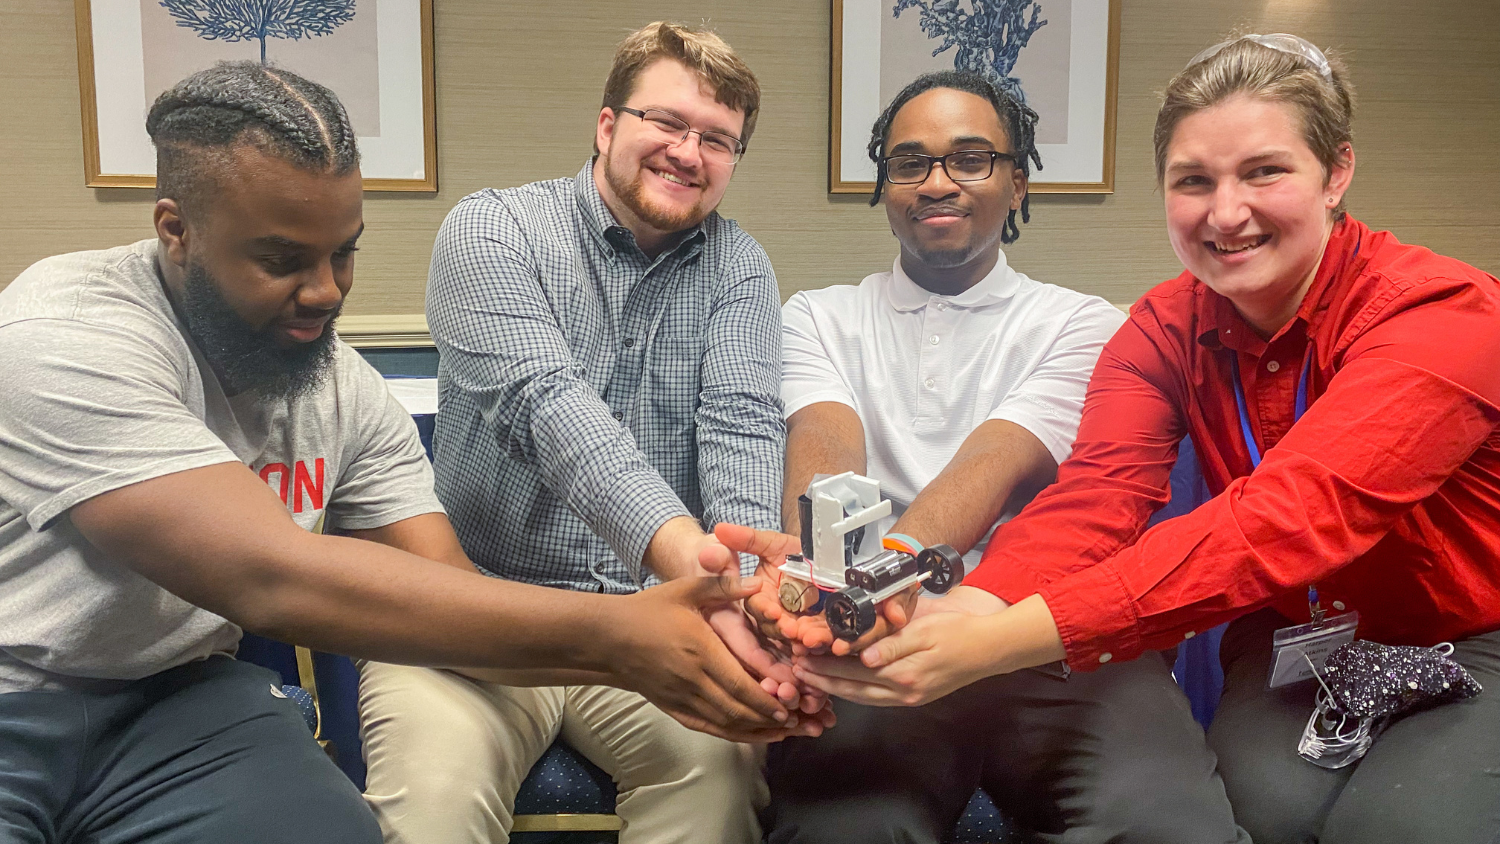 My Student Experience: Technology, Engineering, and Design Education Students Take Home Top Prizes in Regional Competition